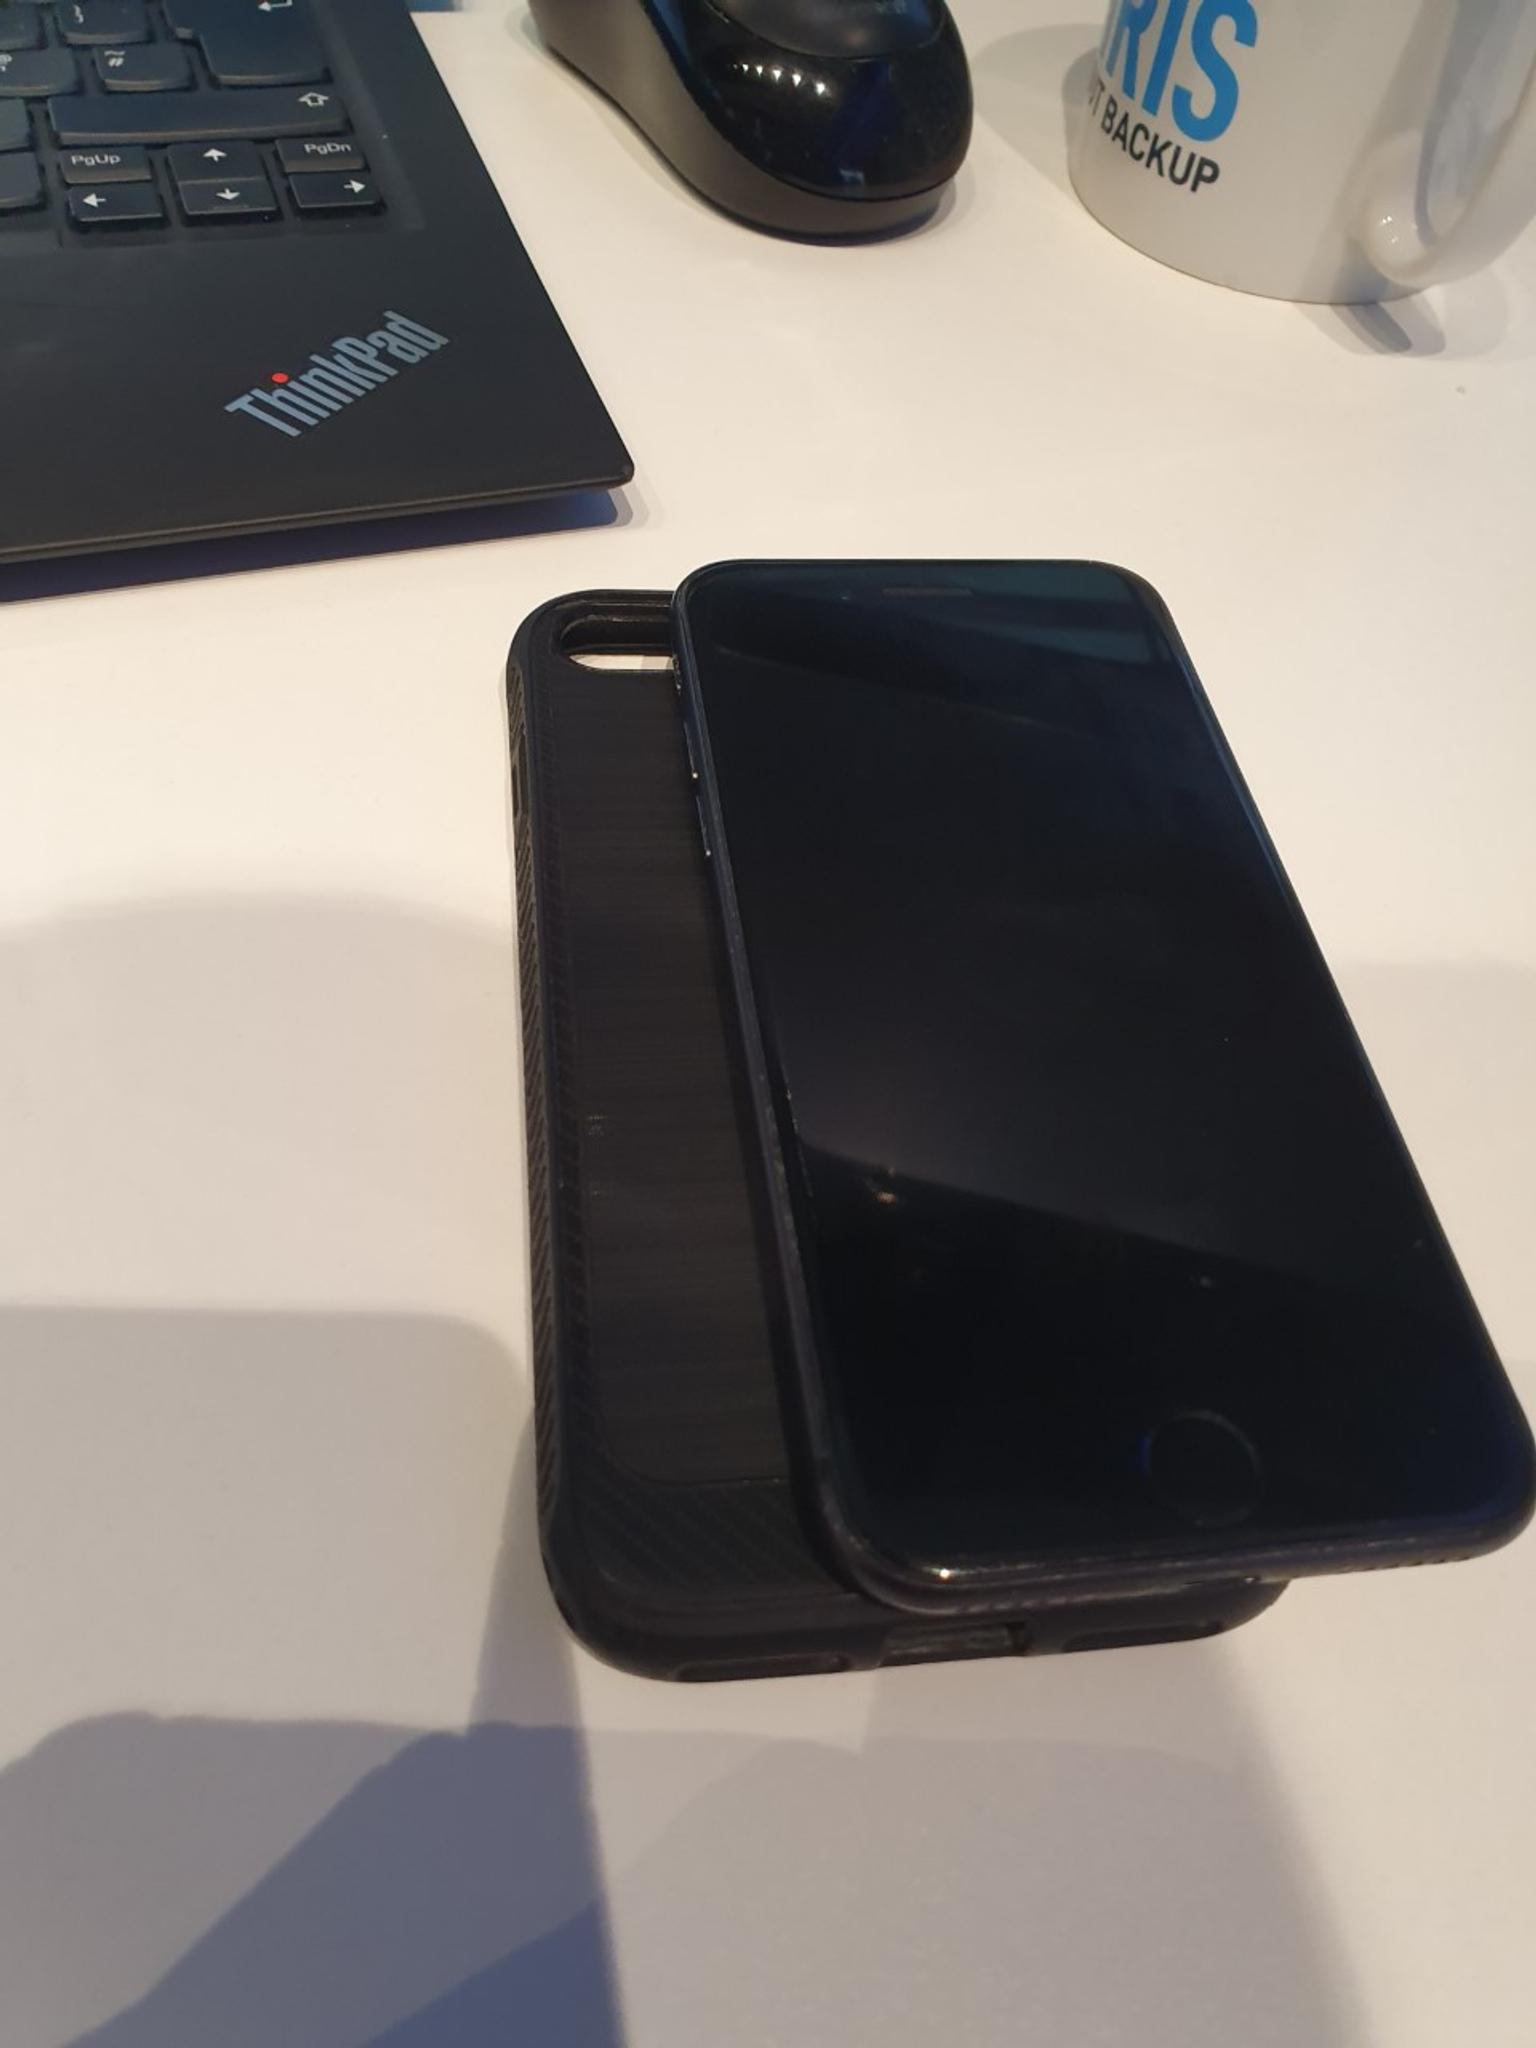 iPhone8 256GB - Unlocked in MK14 Pagnell for £260.00 for sale | Shpock